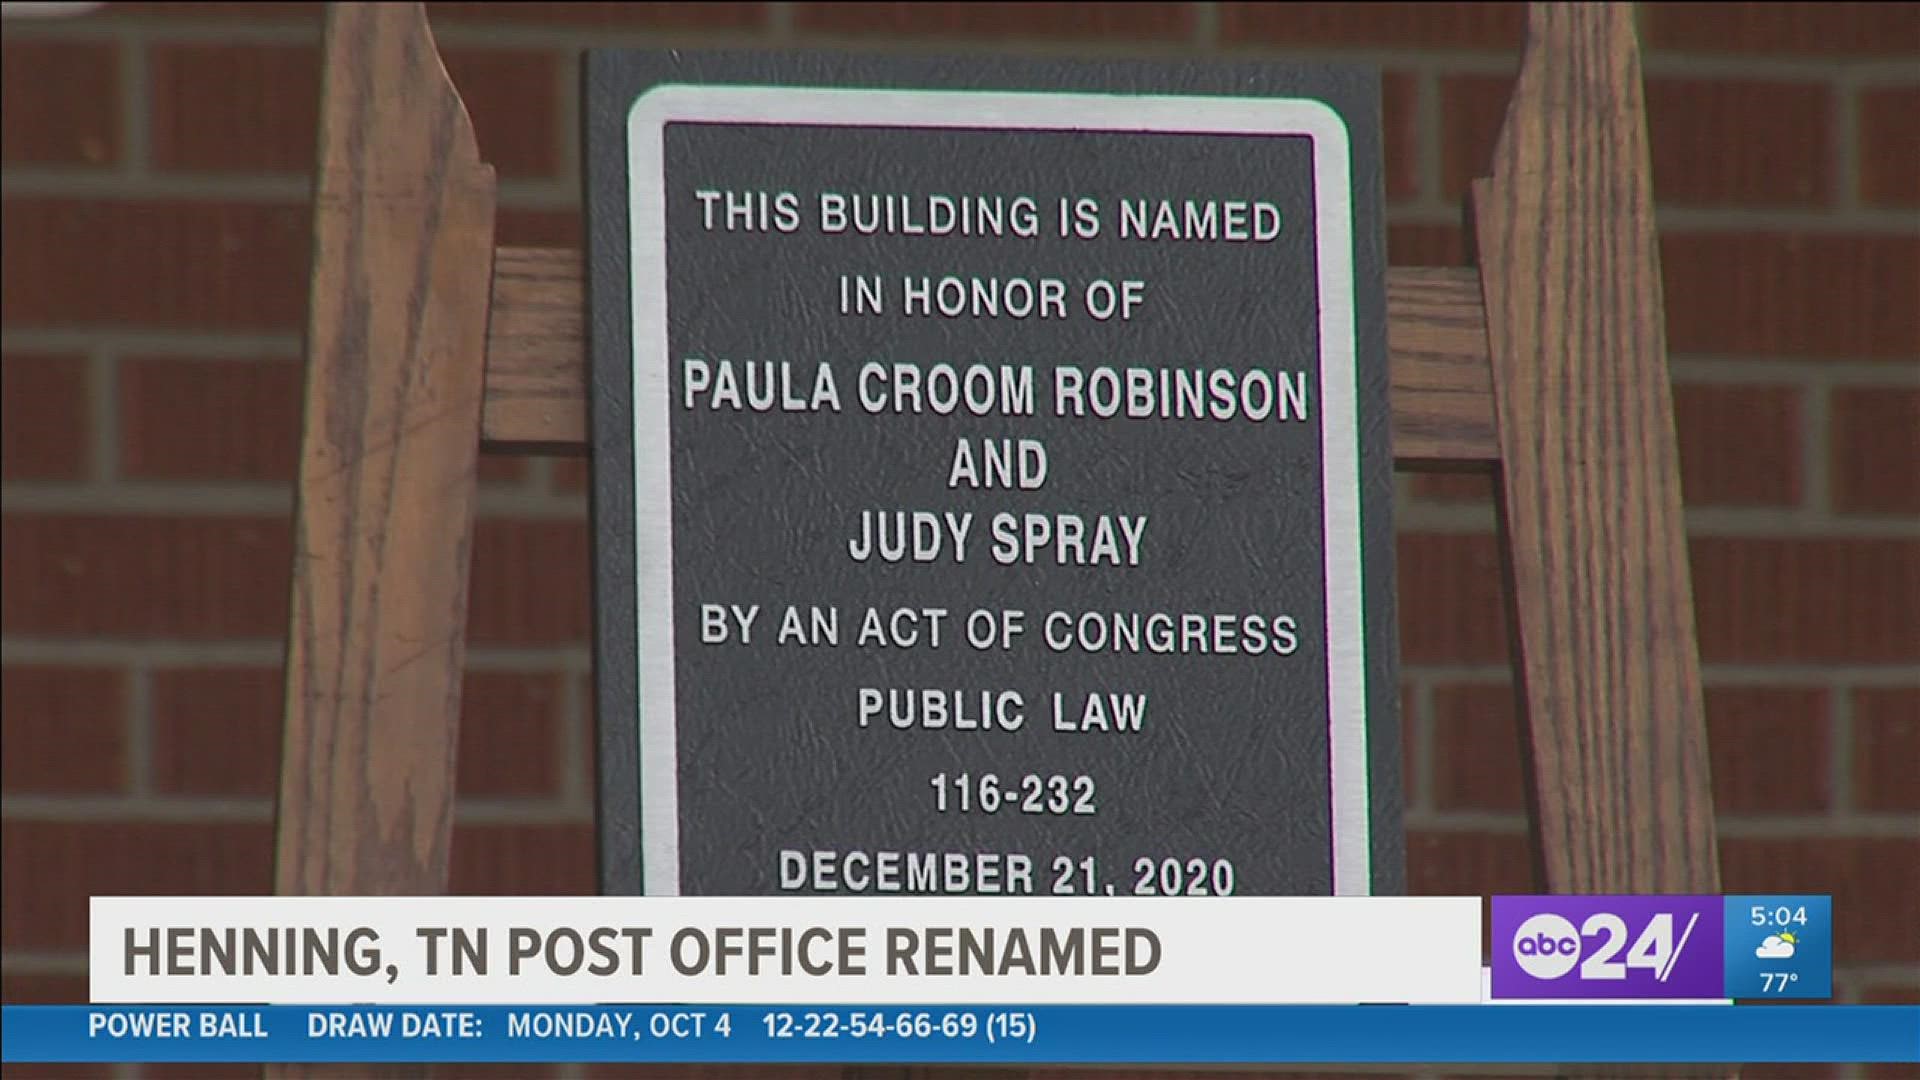 Judy Spray and Paula Robinson were working at the time when a father and son robbed the post office and shot the two women.